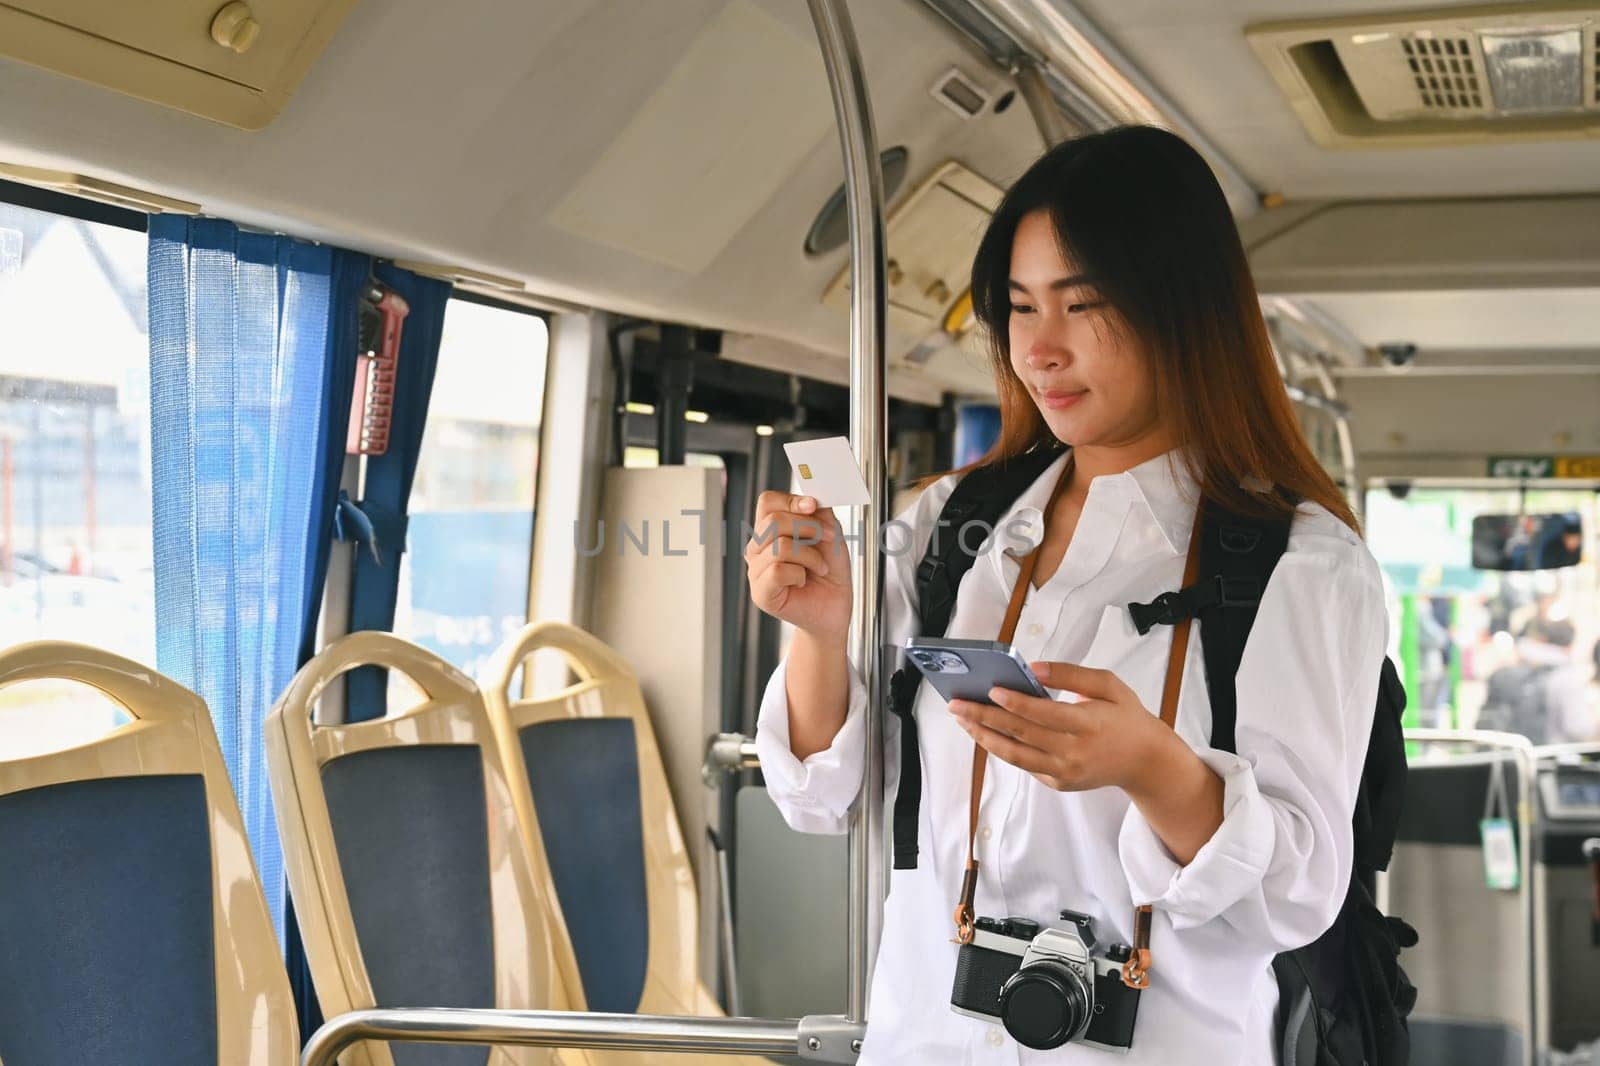 Young woman making mobile payment with credit card while standing in bus. Commuting and lifestyle concept.